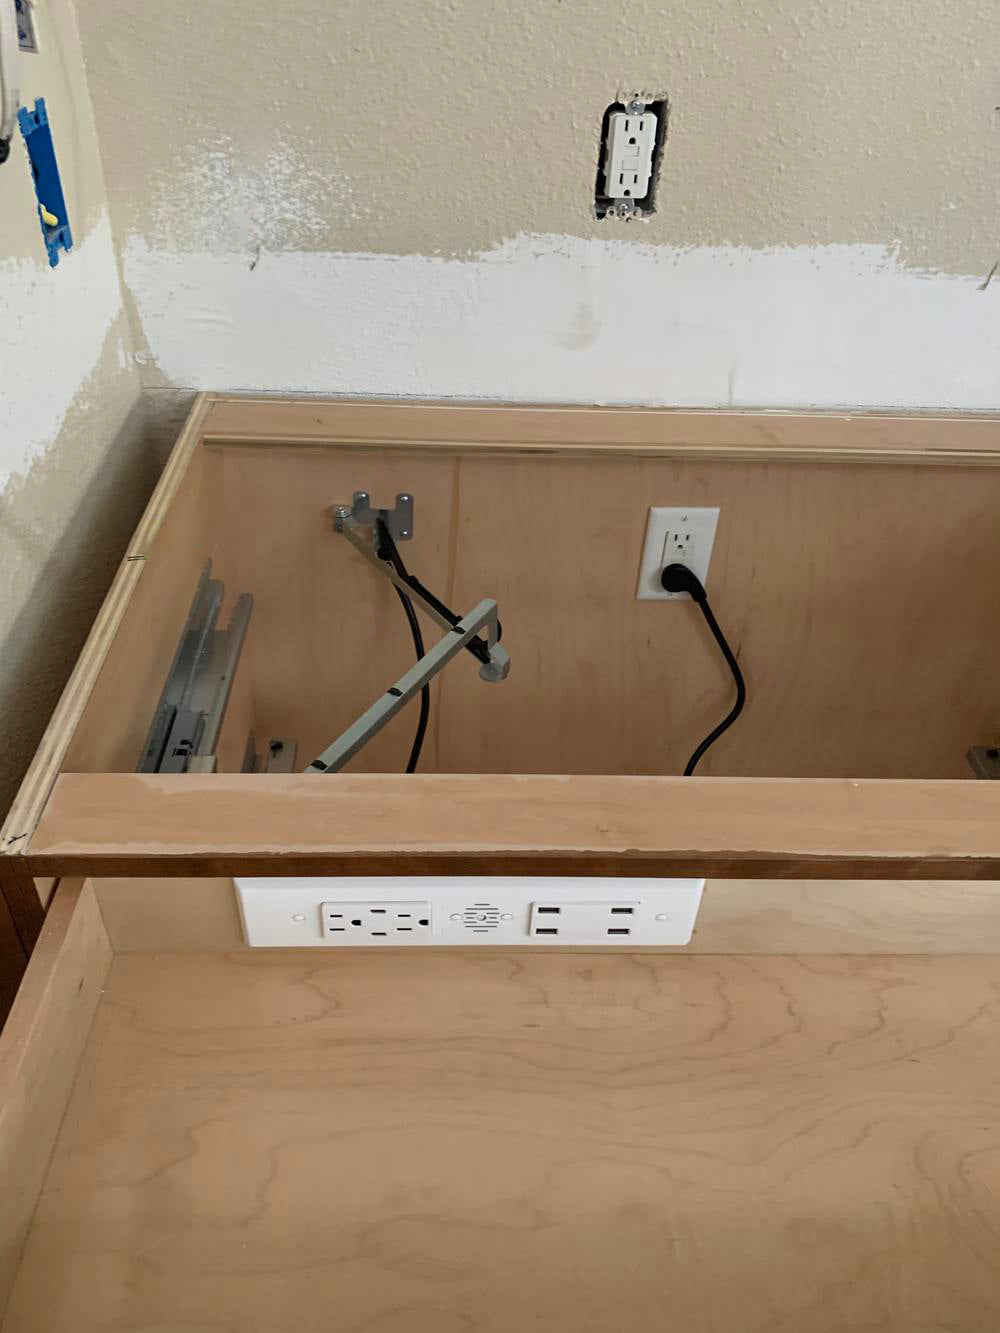 Docking Drawer Blade Duo outlet plugged into in cabinet power supply